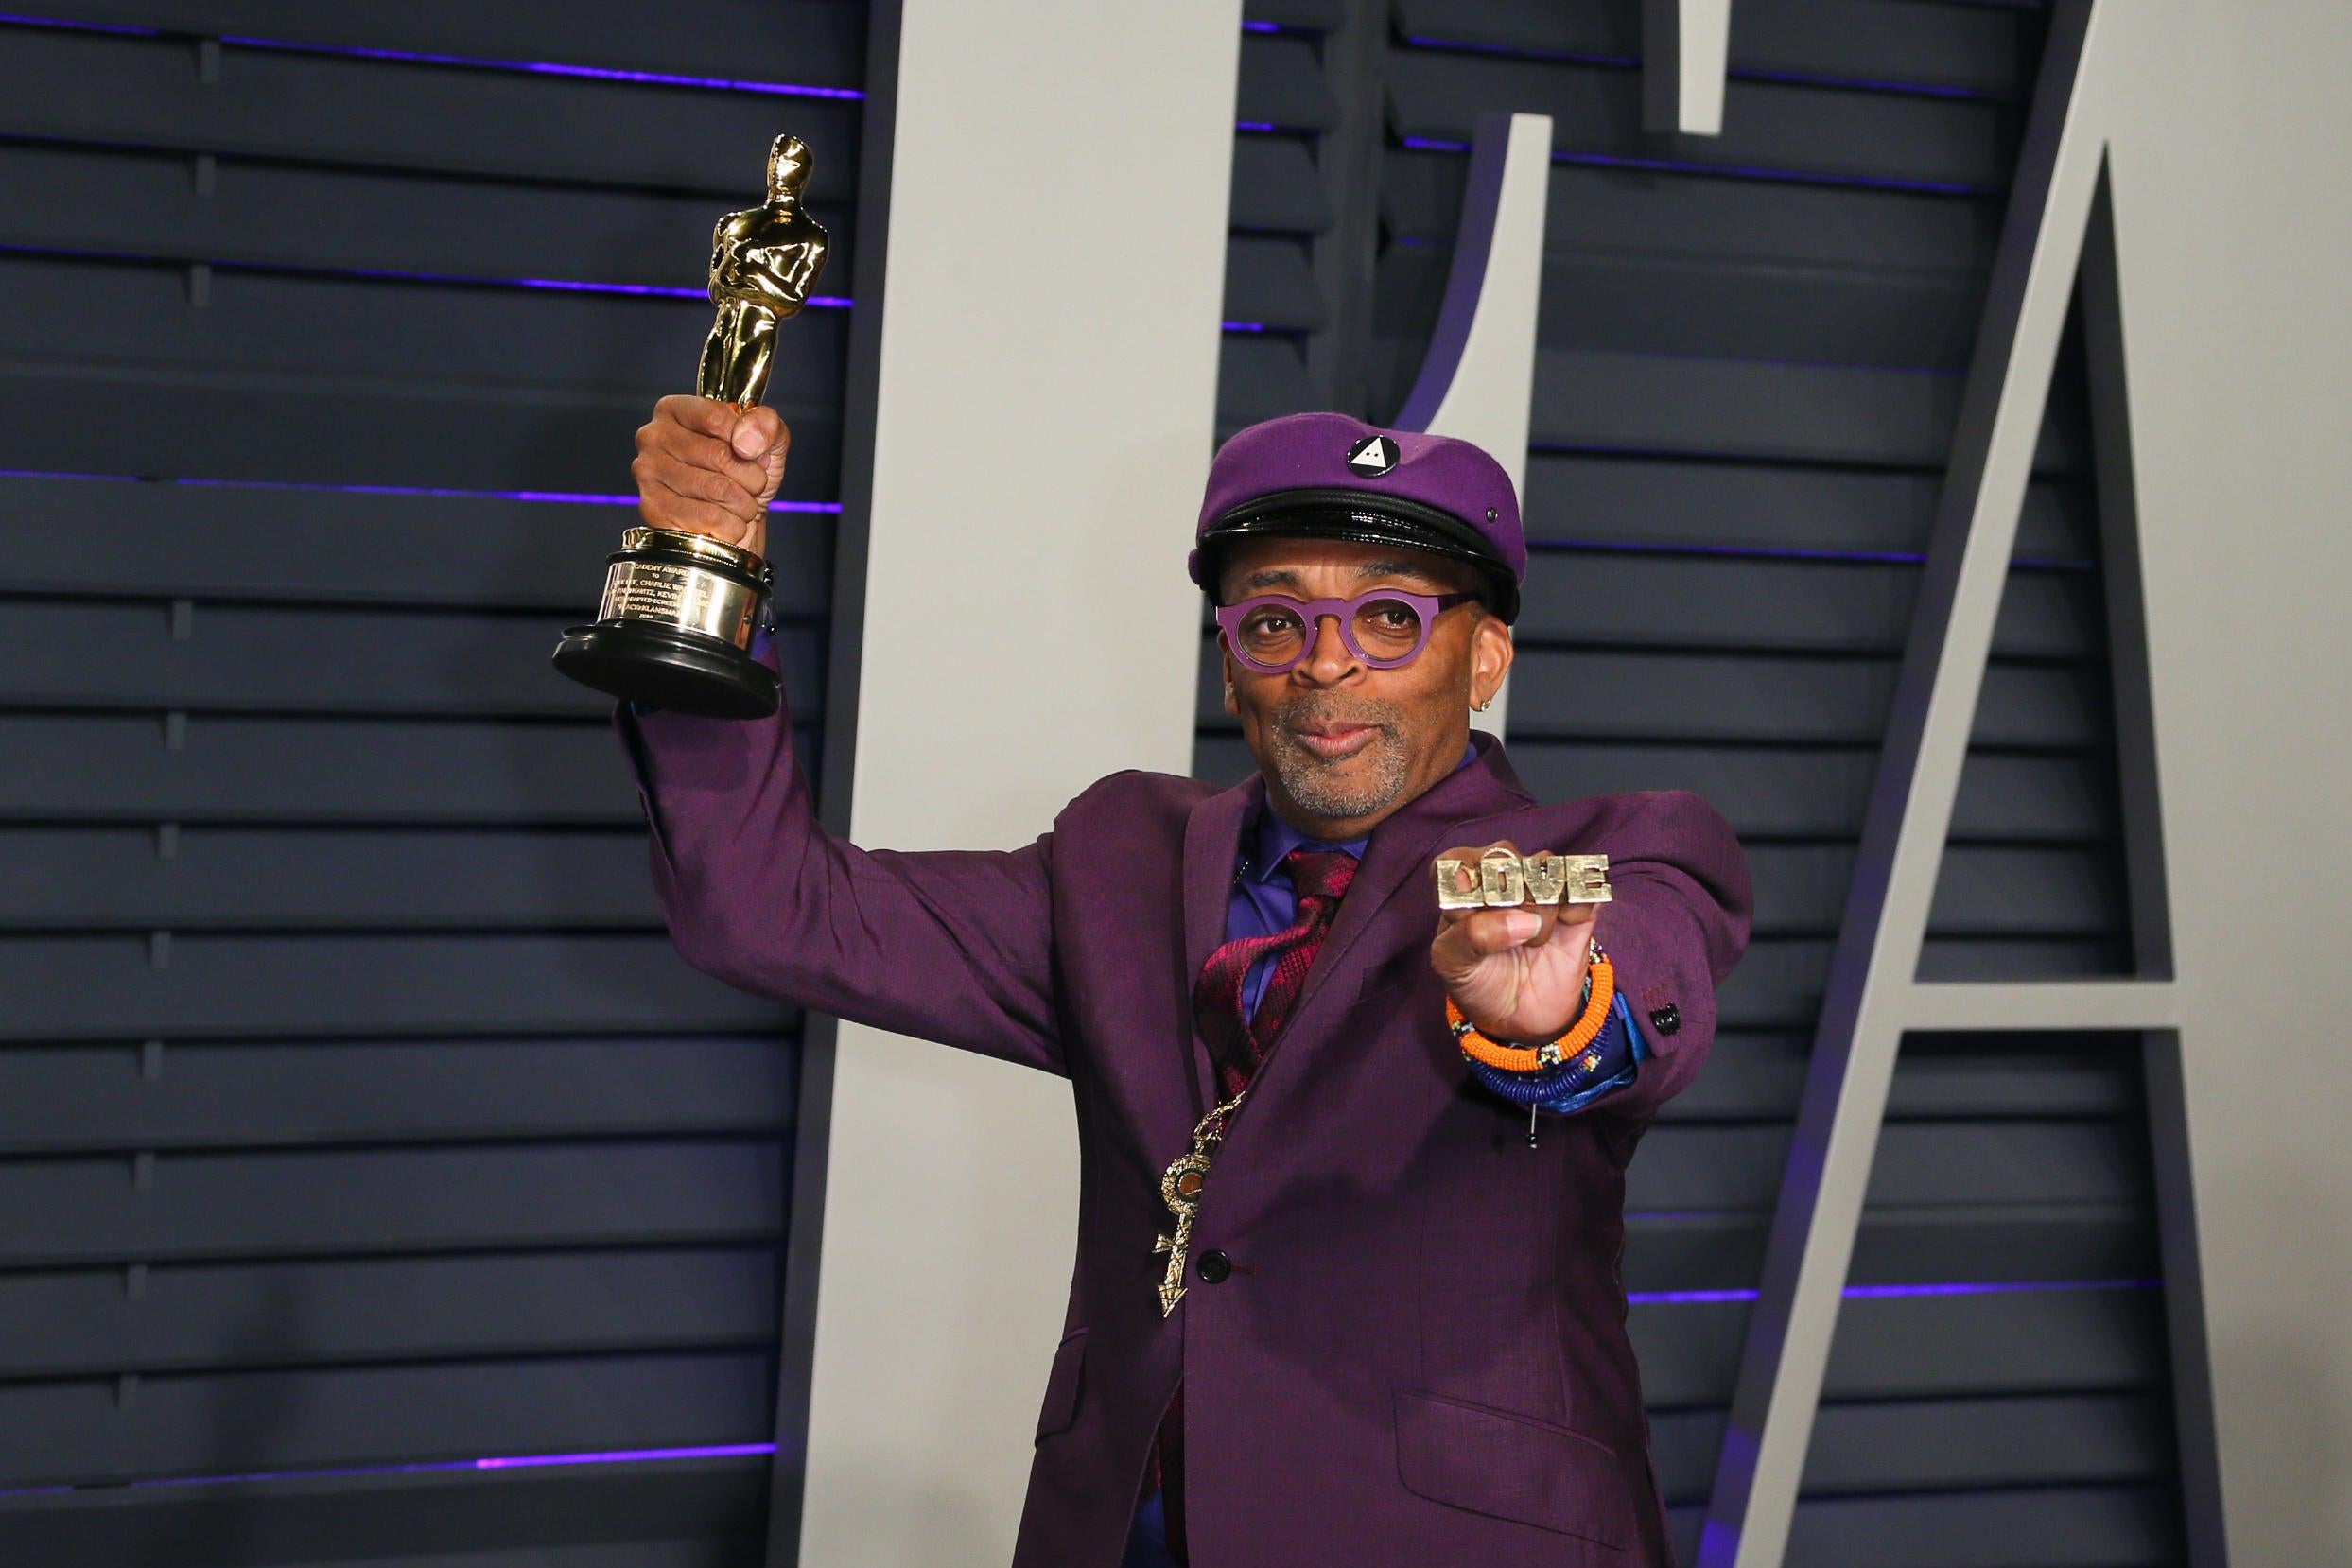 Best Adapted Screenplay winner for 'BlackKklansman' Spike Lee attends the 2019 Vanity Fair Oscar Party following the 91st Academy Awards at The Wallis Annenberg Center for the Performing Arts in Beverly Hills on February 24, 2019. (Photo by JB Lacroix / AFP)        (Photo credit should read JB LACROIX/AFP/Getty Images)